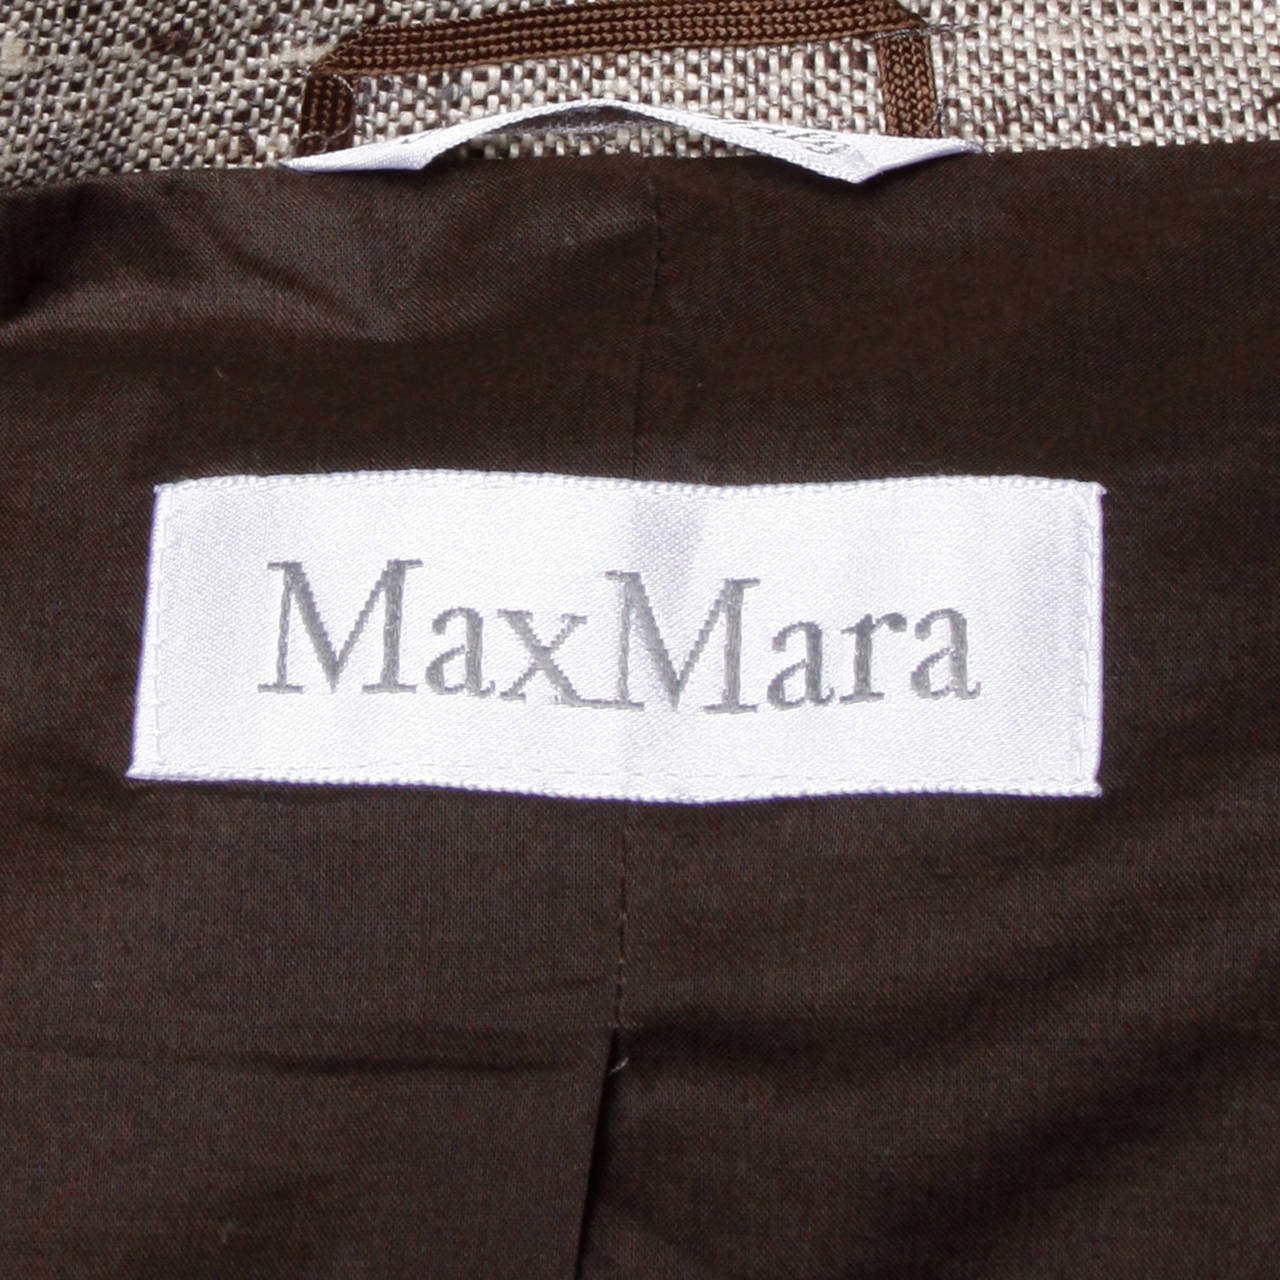 Minimalist Max Mara jacket and pants ensemble in linen and silk.

Details:

Fully Lined
Side Pockets On Jacket
Front Button Closure On Jacket
Front Zipper and Hook Closure On Pants
Marked Size: Not Marked
Estimated Size: Large
Color: